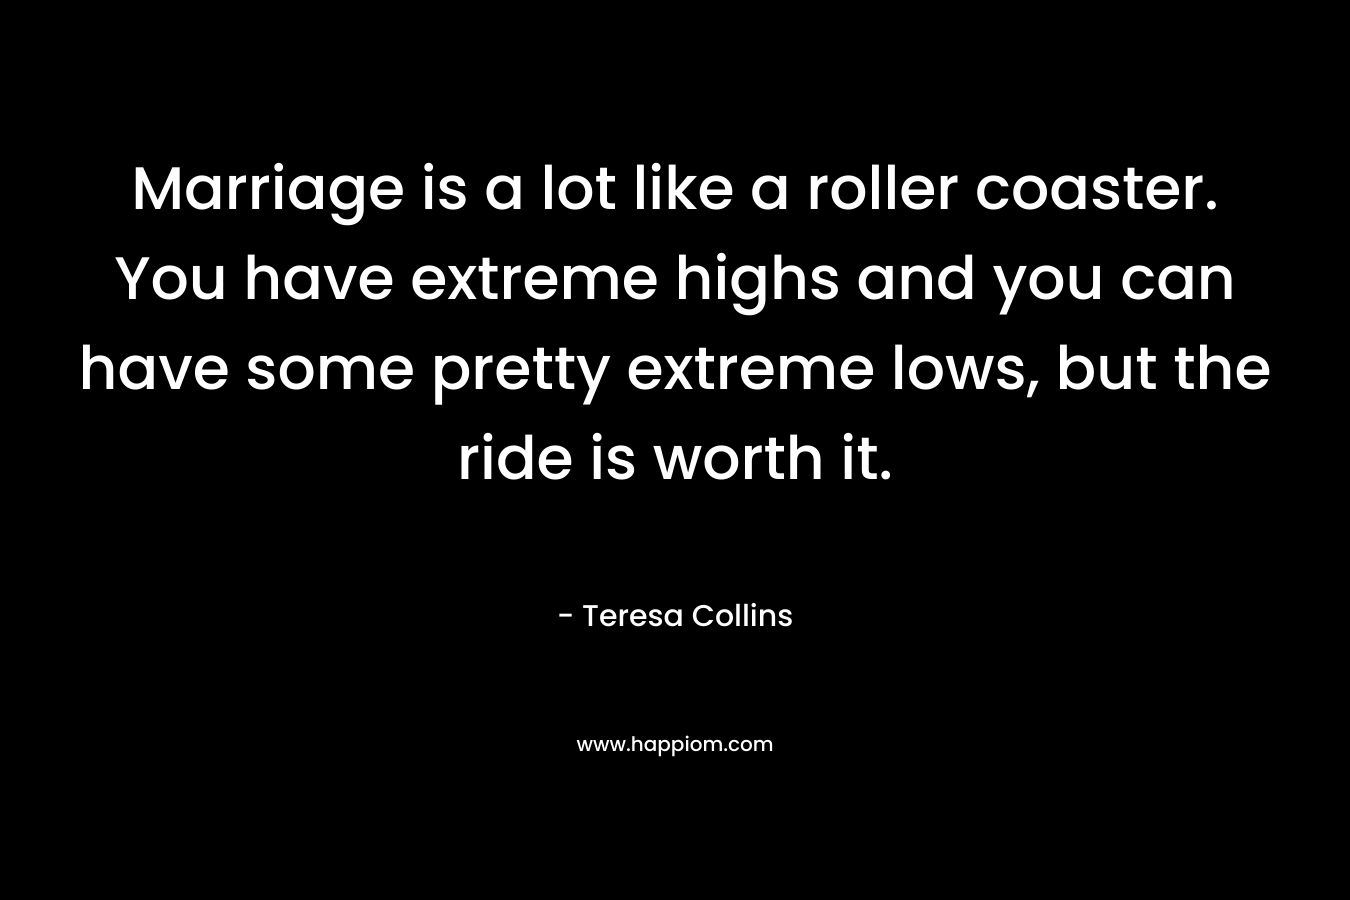 Marriage is a lot like a roller coaster. You have extreme highs and you can have some pretty extreme lows, but the ride is worth it. – Teresa Collins